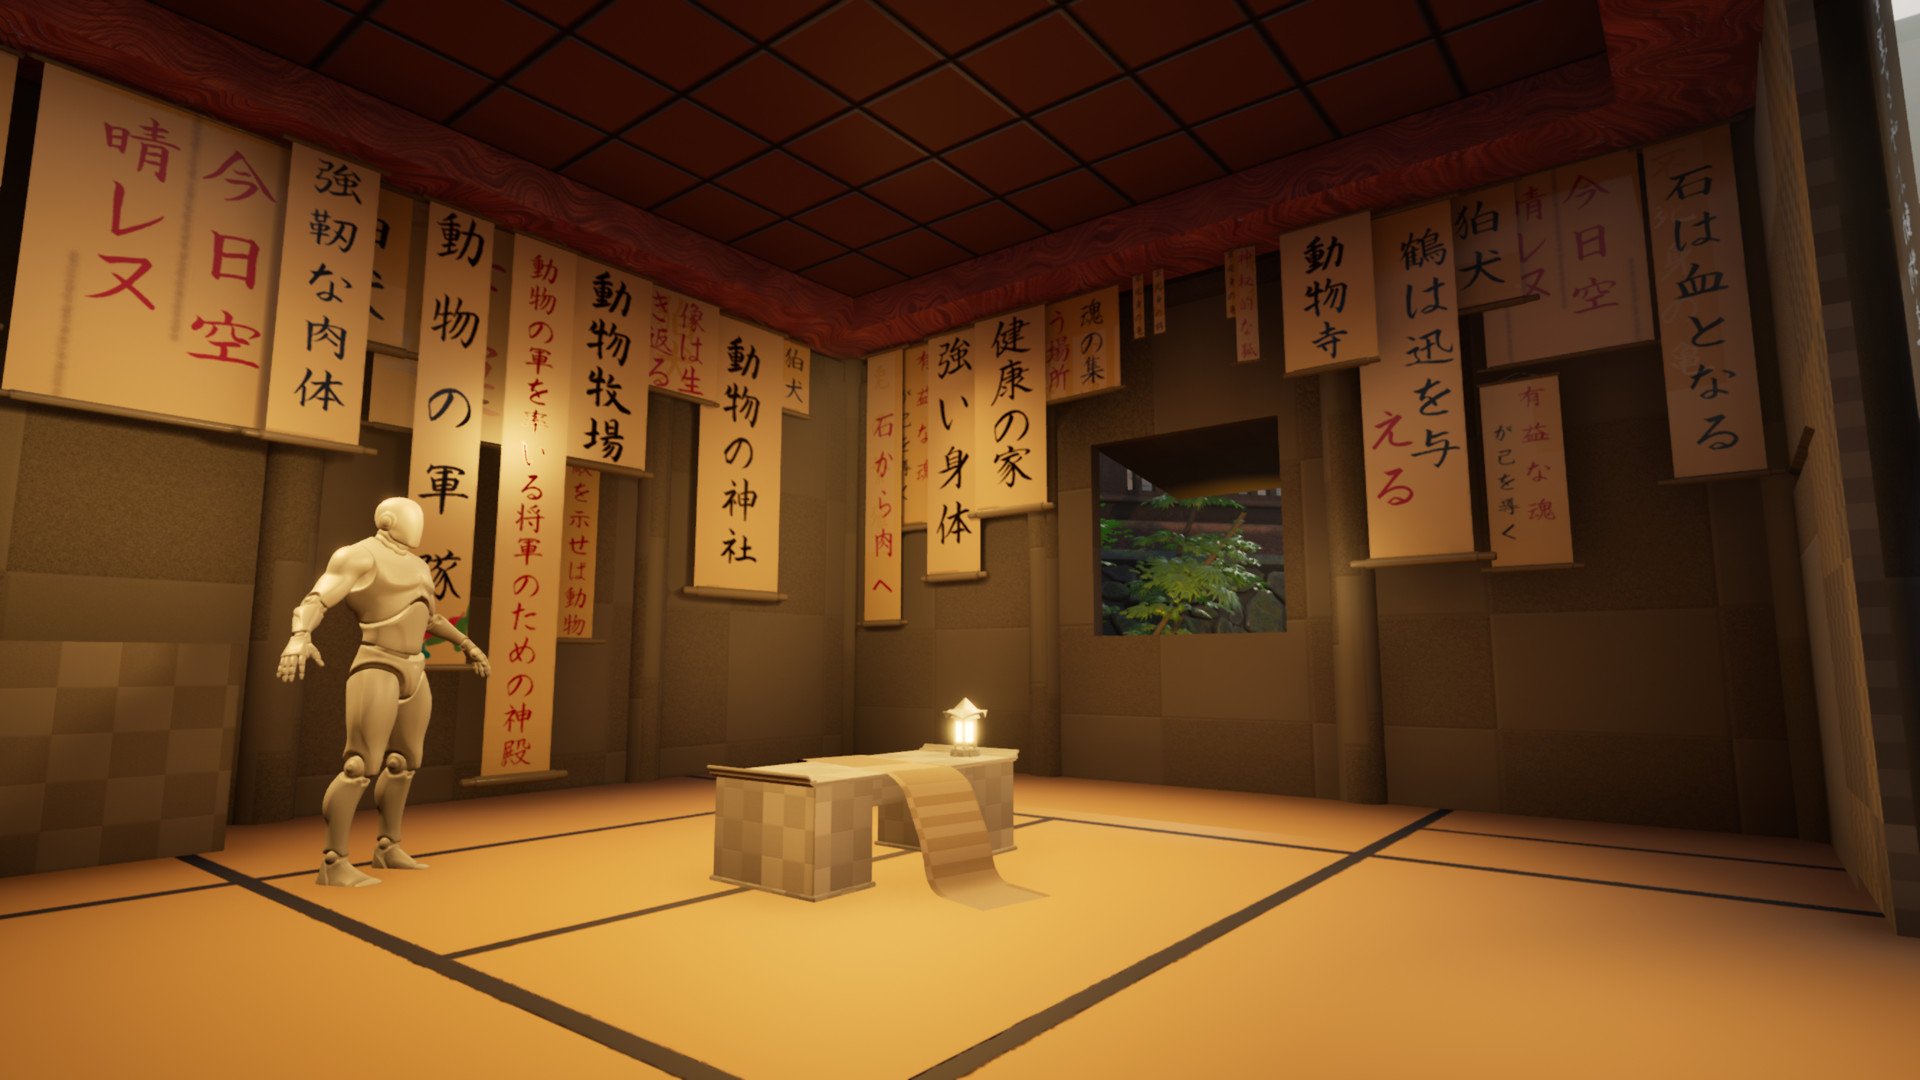 Screenshot of the interior of the calligraphers hut. It’s all in an overpowering yellow tint and tons of fortune scrolls with writings are hanging from the walls.